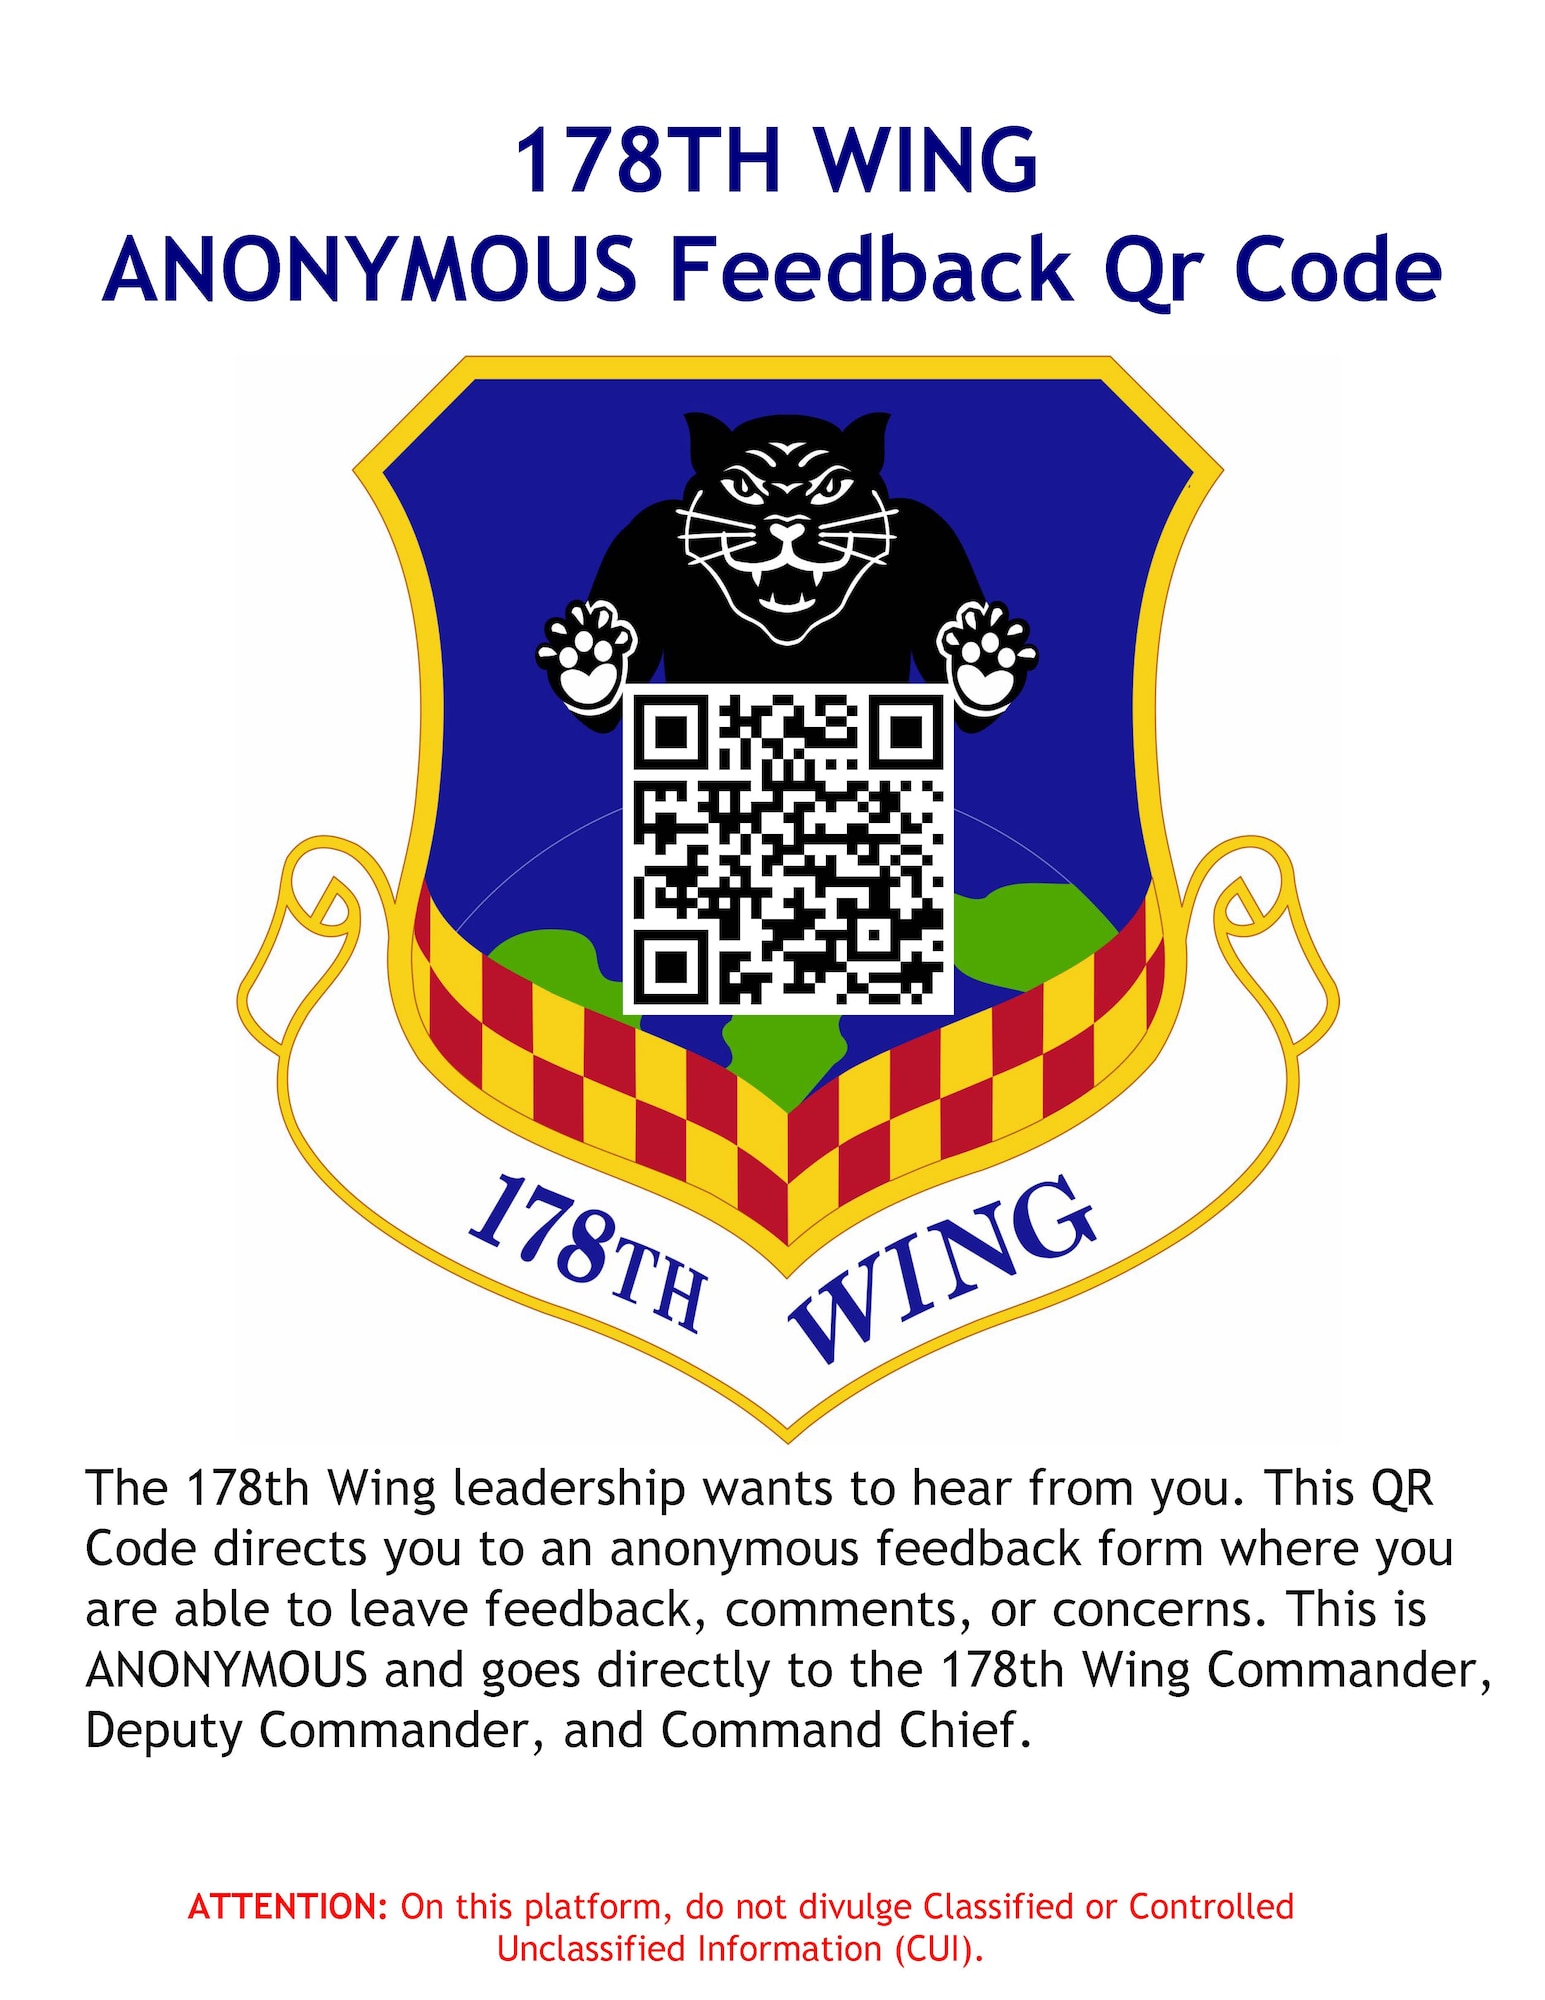 The 178th Wing leadership wants to hear from you. This QR Code directs you to an anonymous feedback form where you are able to leave feedback, comments, or concerns. This is ANONYMOUS and goes directly to the 178th Wing Commander, Deputy Commander, and Command Chief.